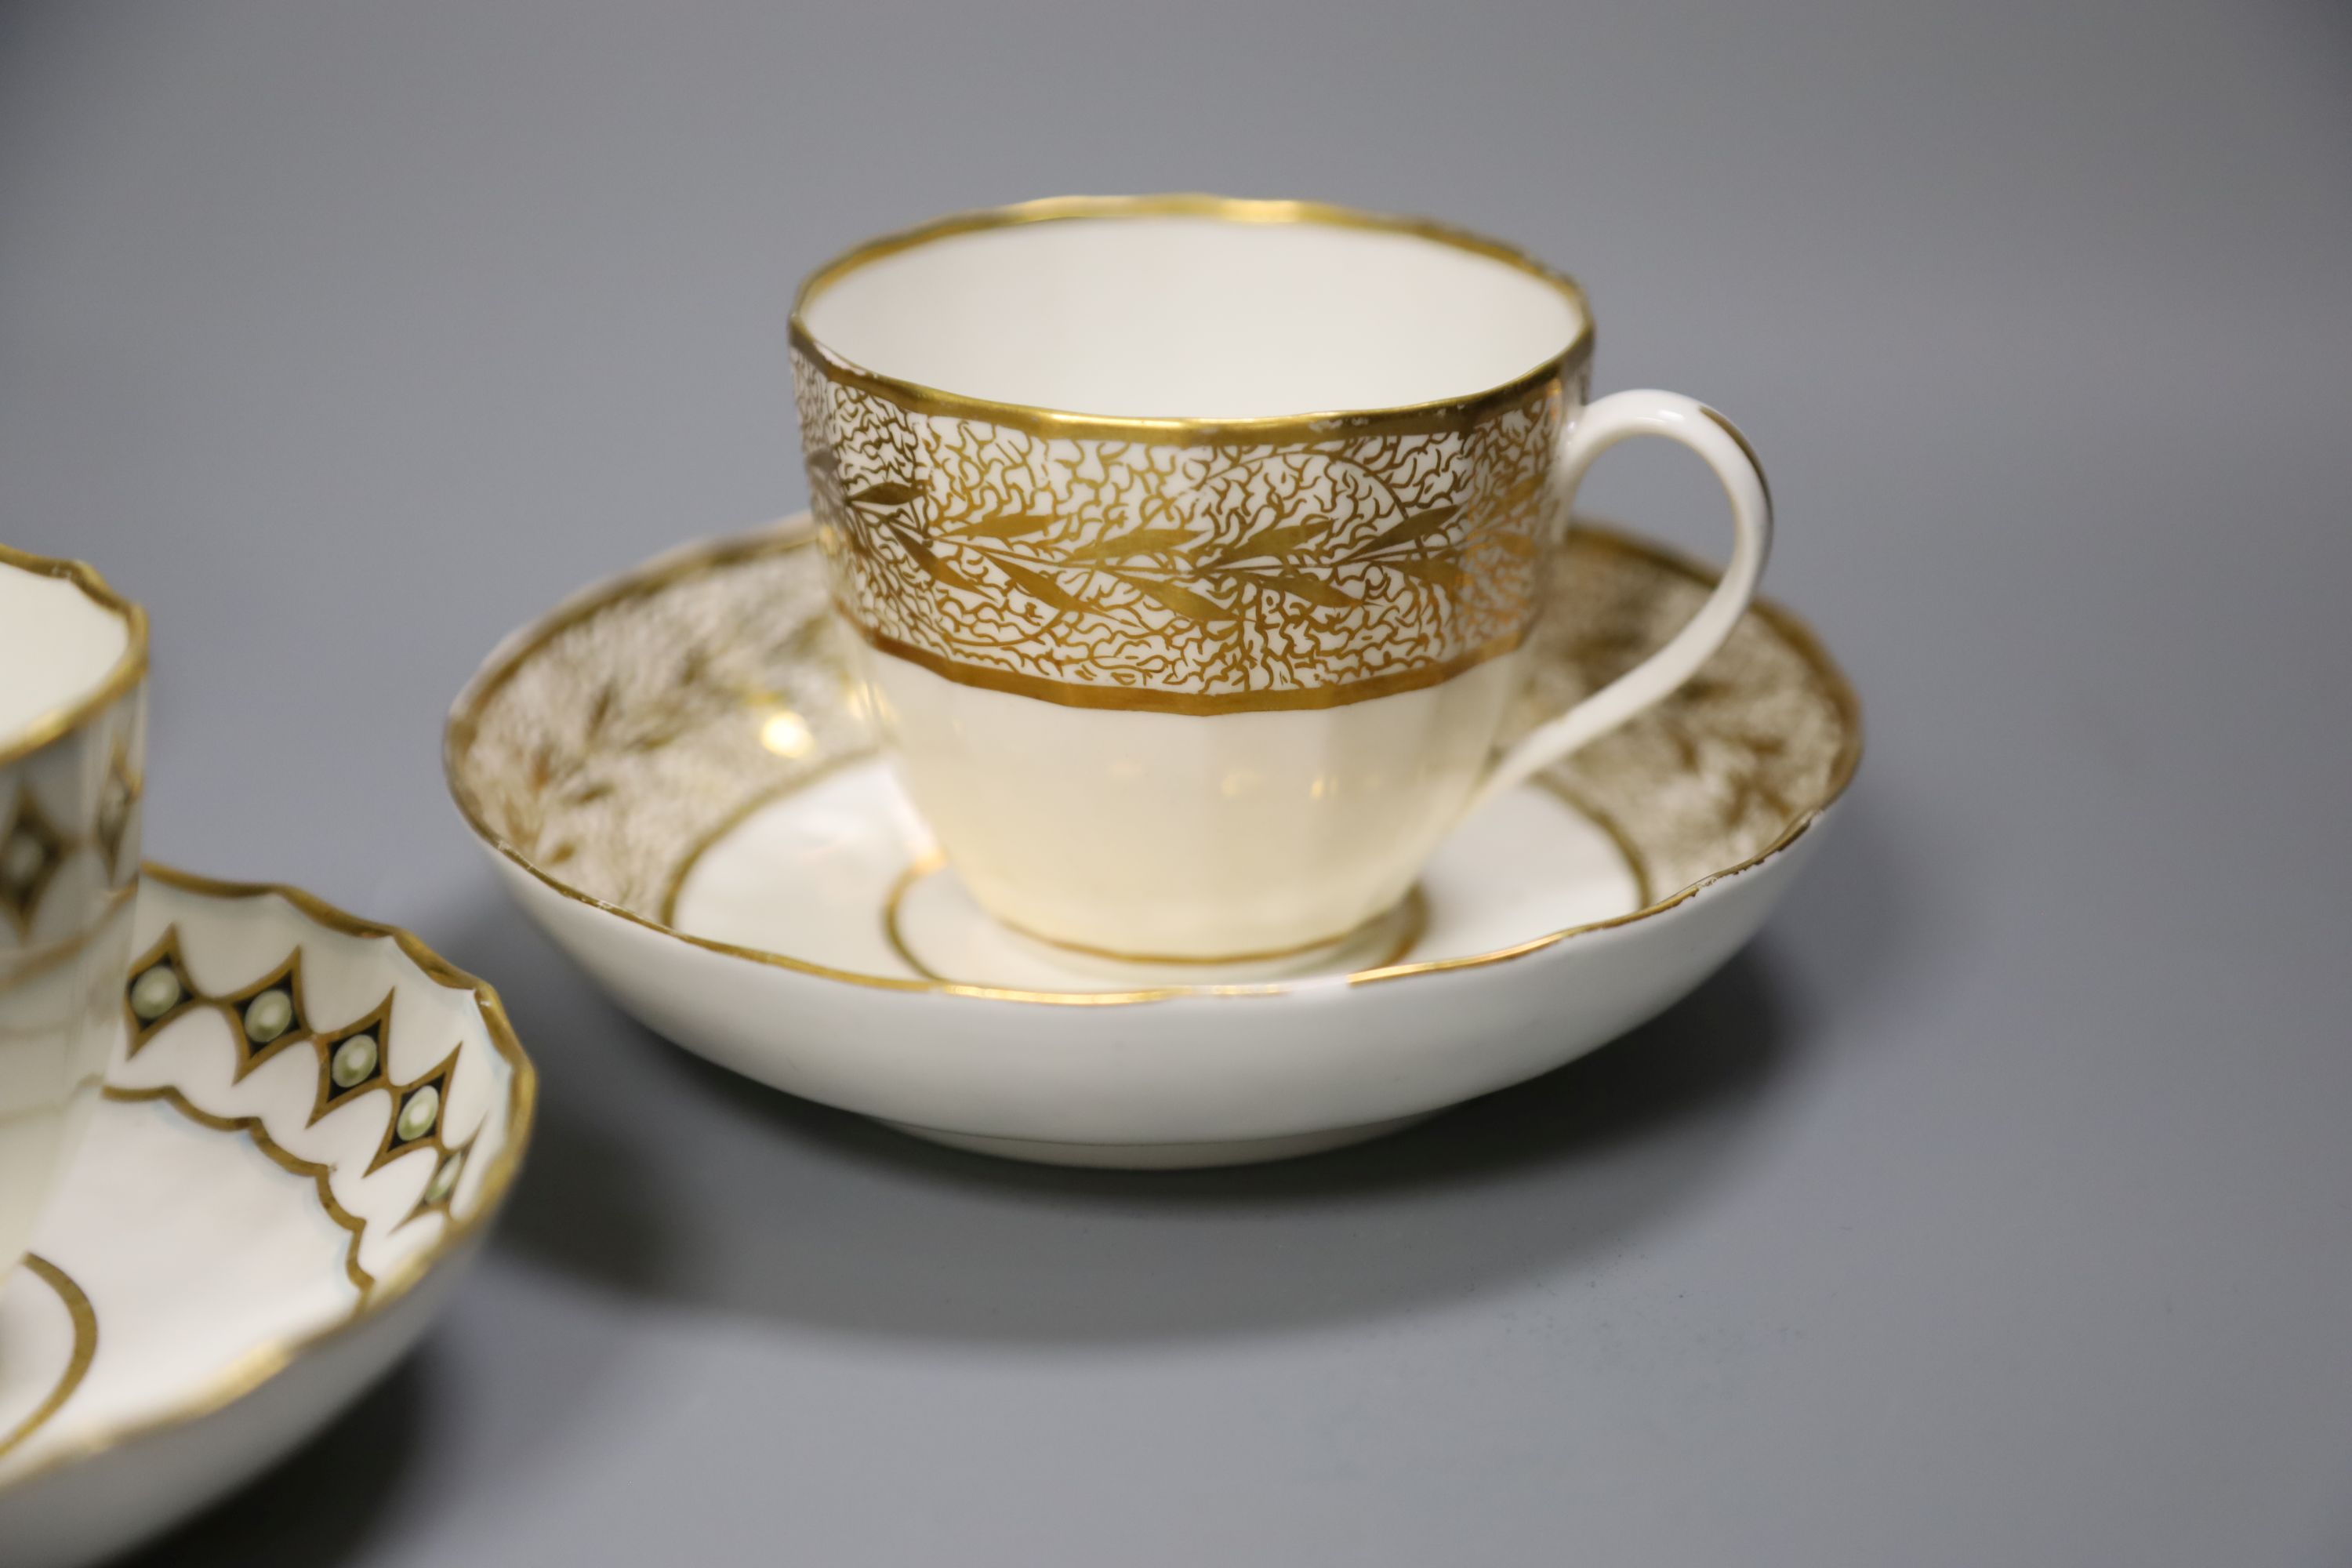 A Derby faceted teacup and saucer painted with pearls on diamond gilding pattern 135 in puce, another similar shaped Derby teacup